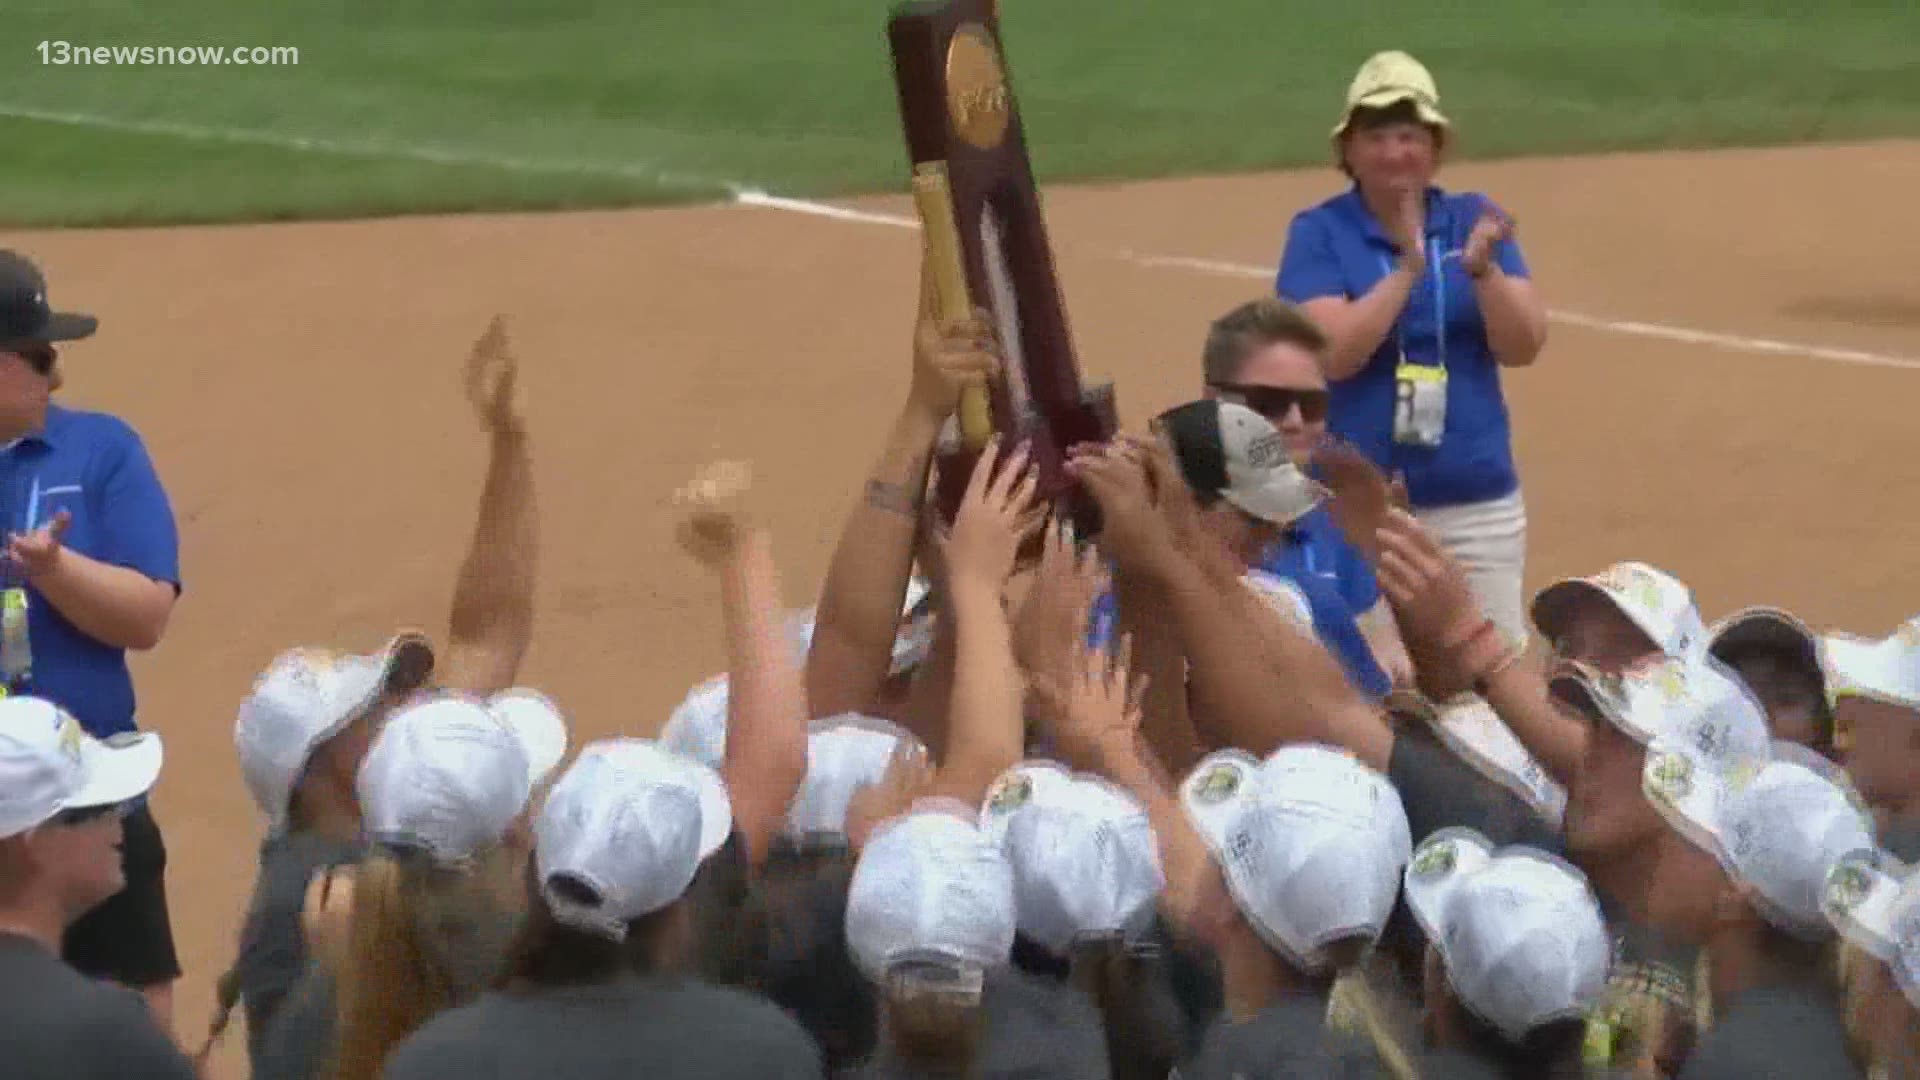 The Marlins captured their third Division III national title in softball